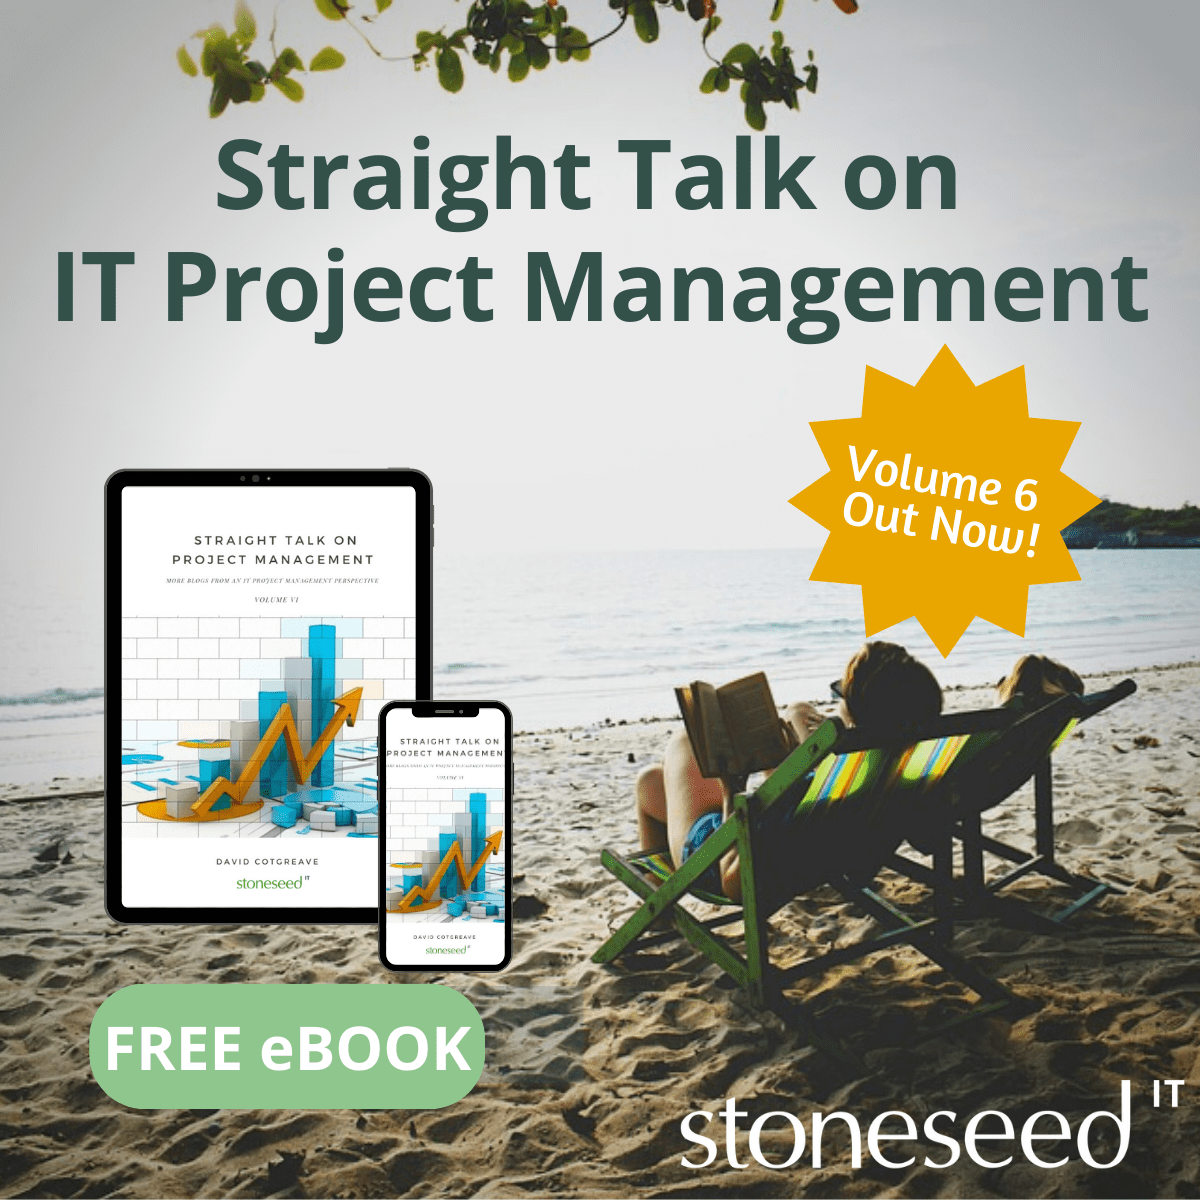 FREE IT Project Management eBook